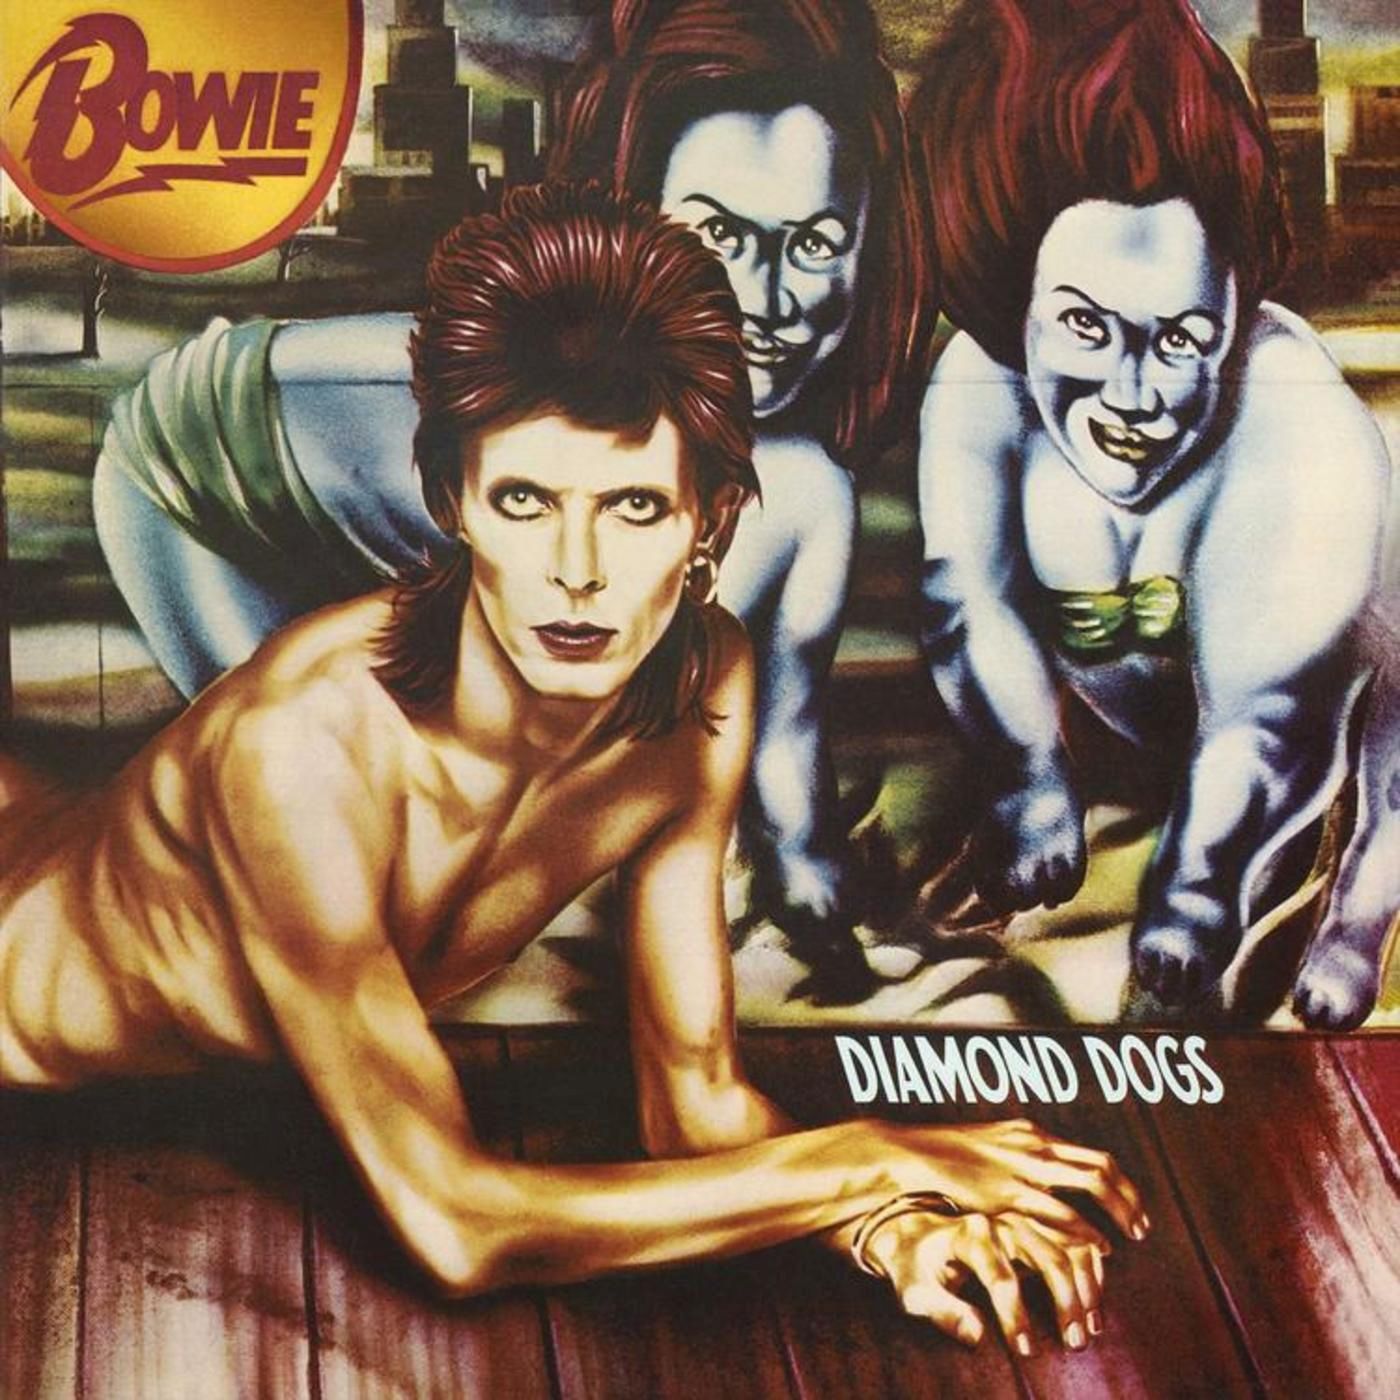 Bowie, David - Diamond Dogs (2017 remastered reissue) - CD - New